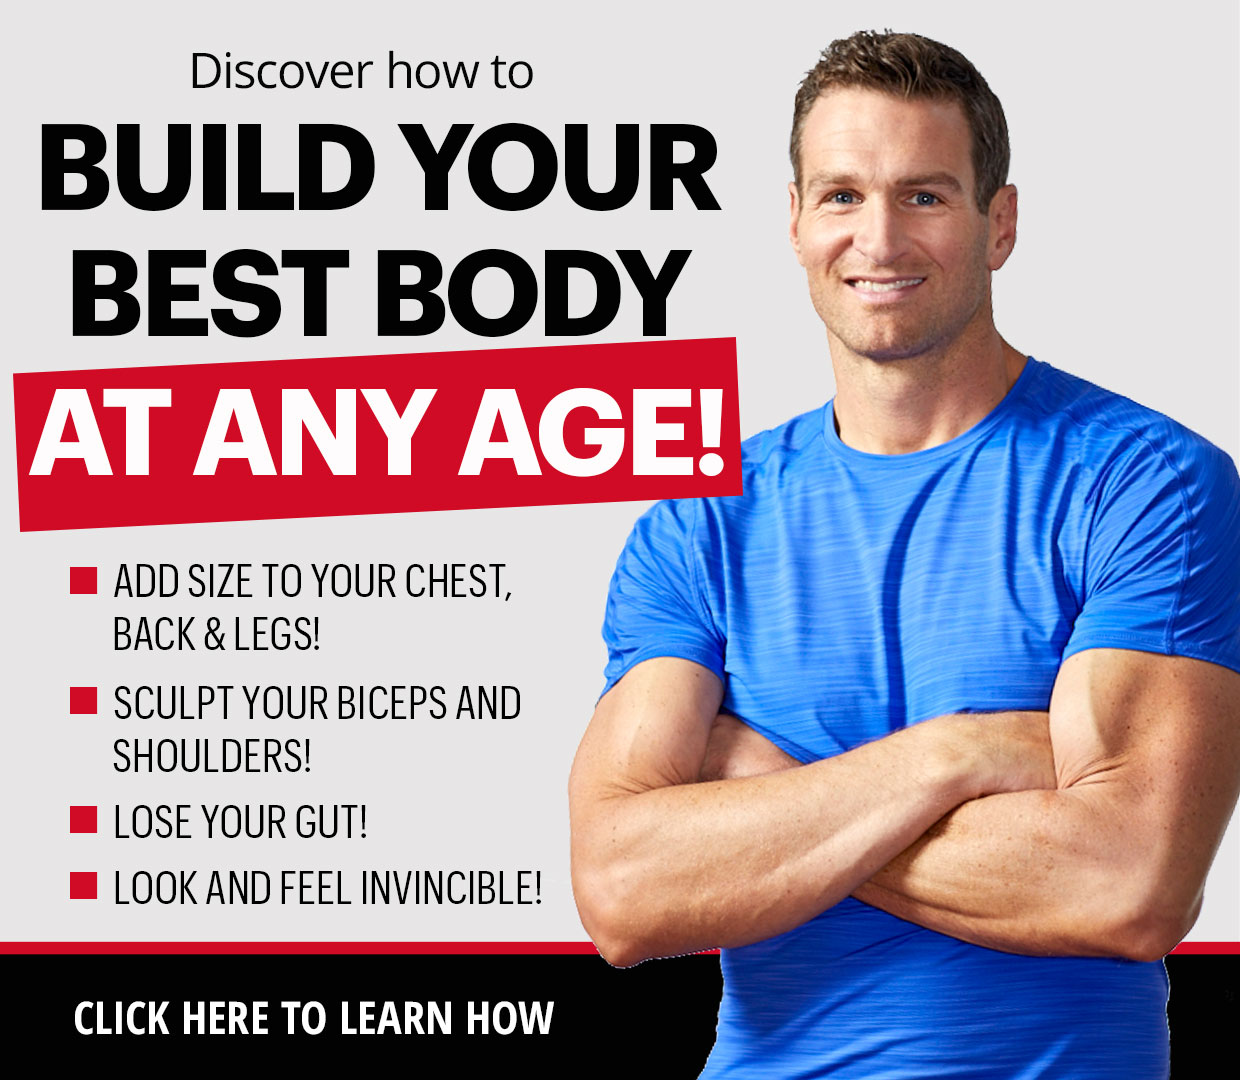 The complete muscle building program for guys at any age